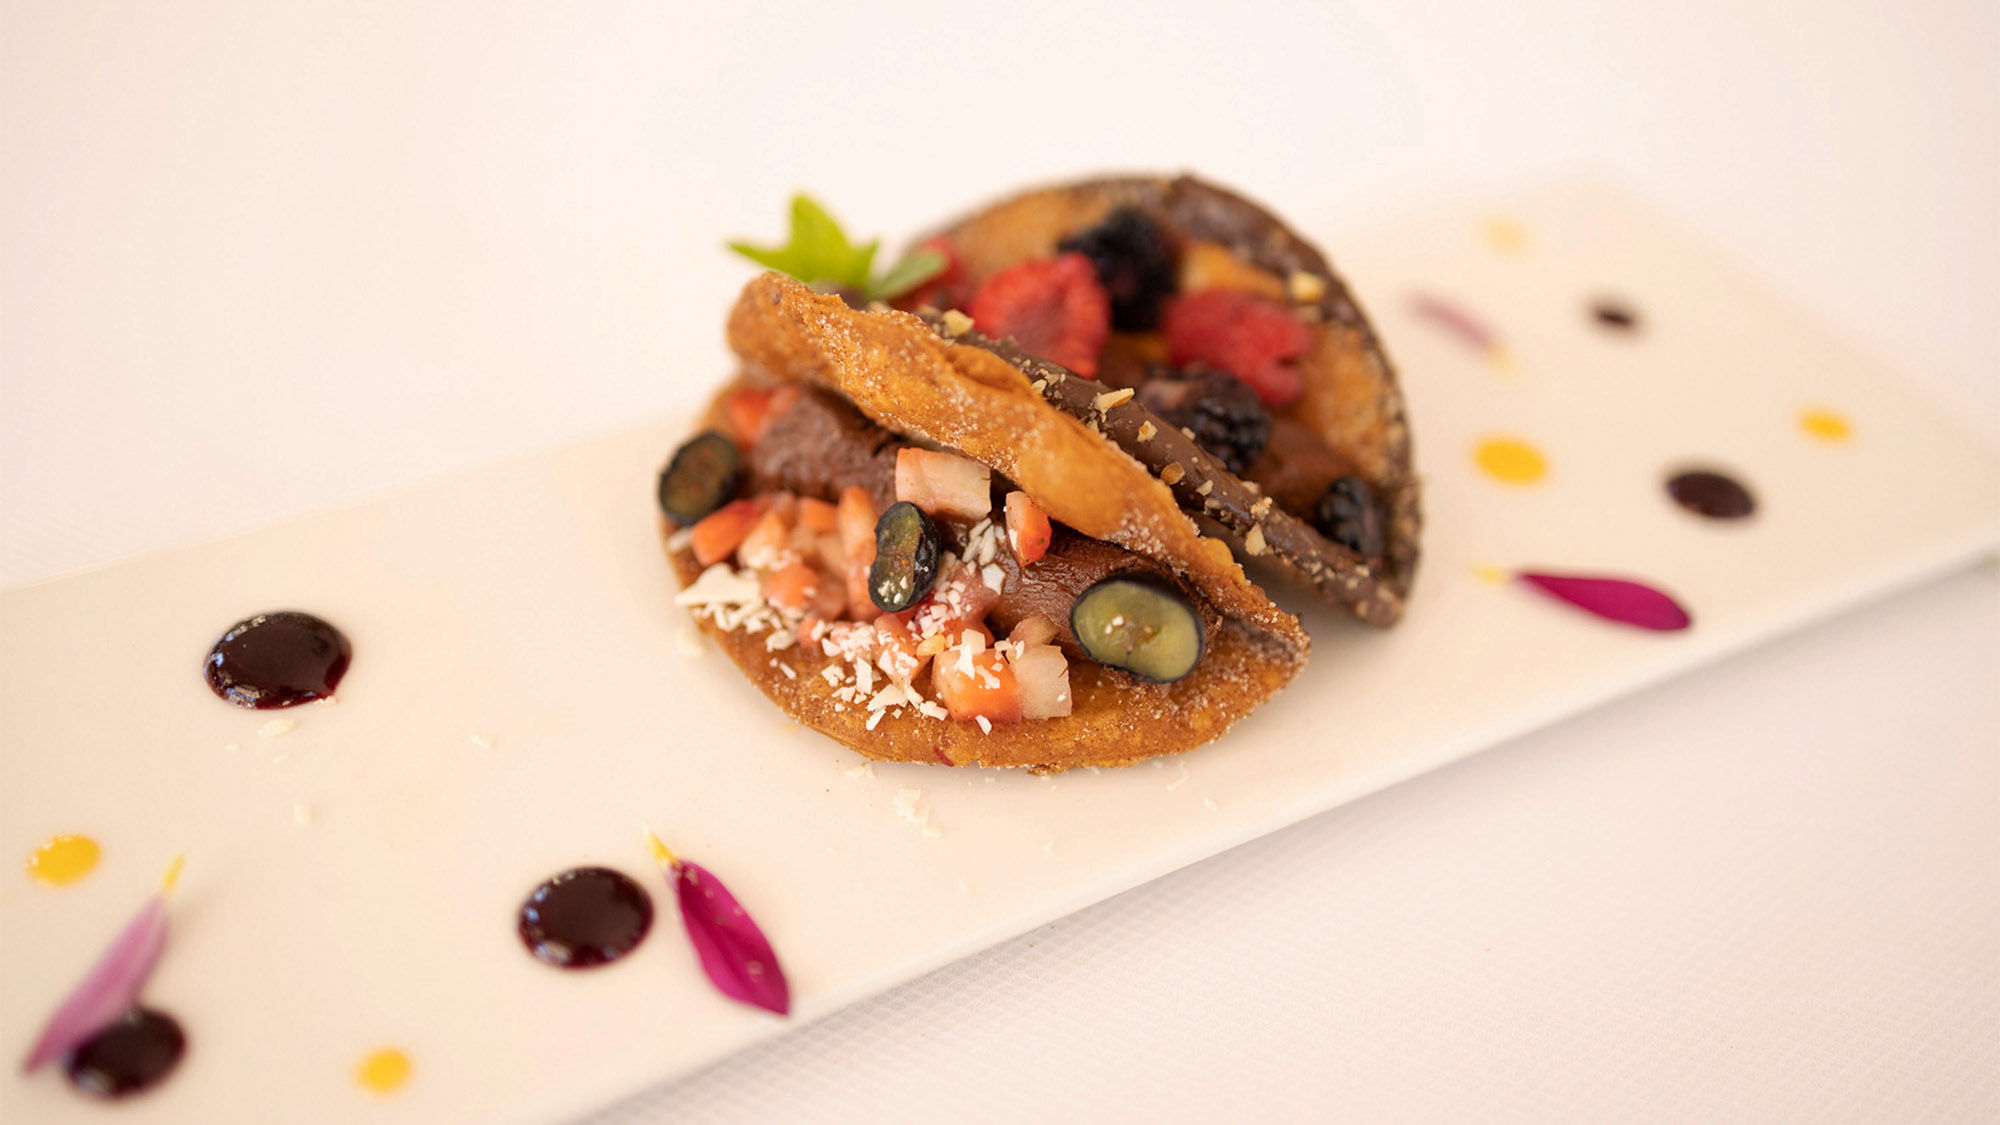 The Antioxidant taco is made with buñuelo (fried dough fritter), chocolate ganache, and berries.